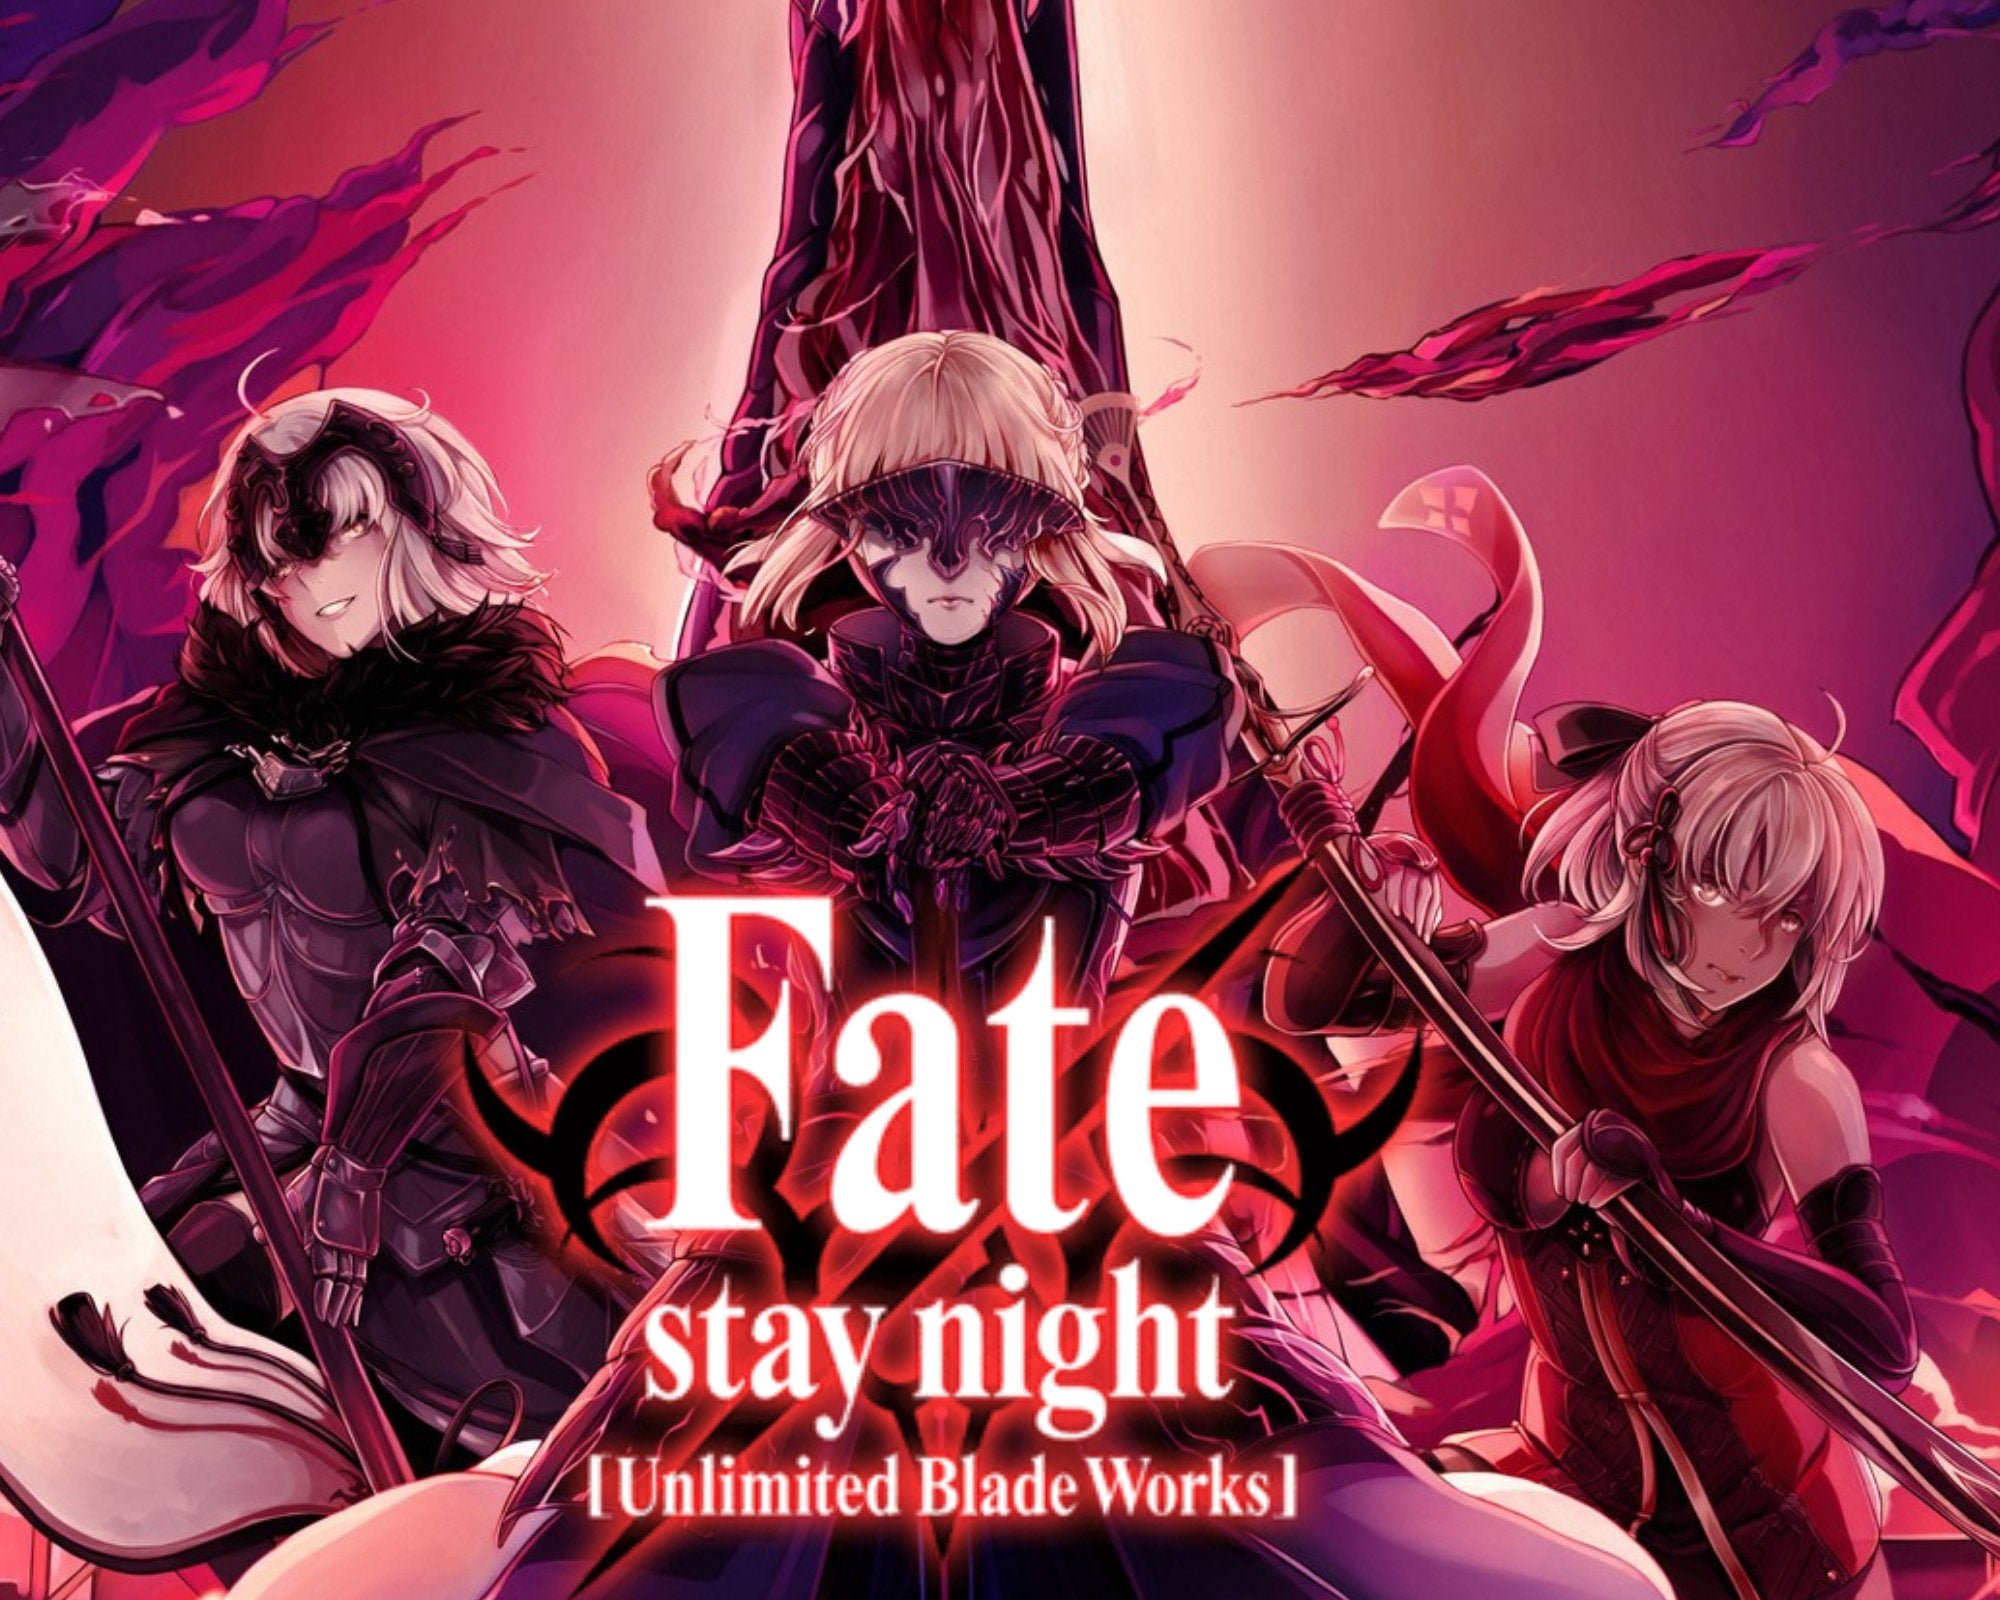 EPEE FATE STAY NIGHT